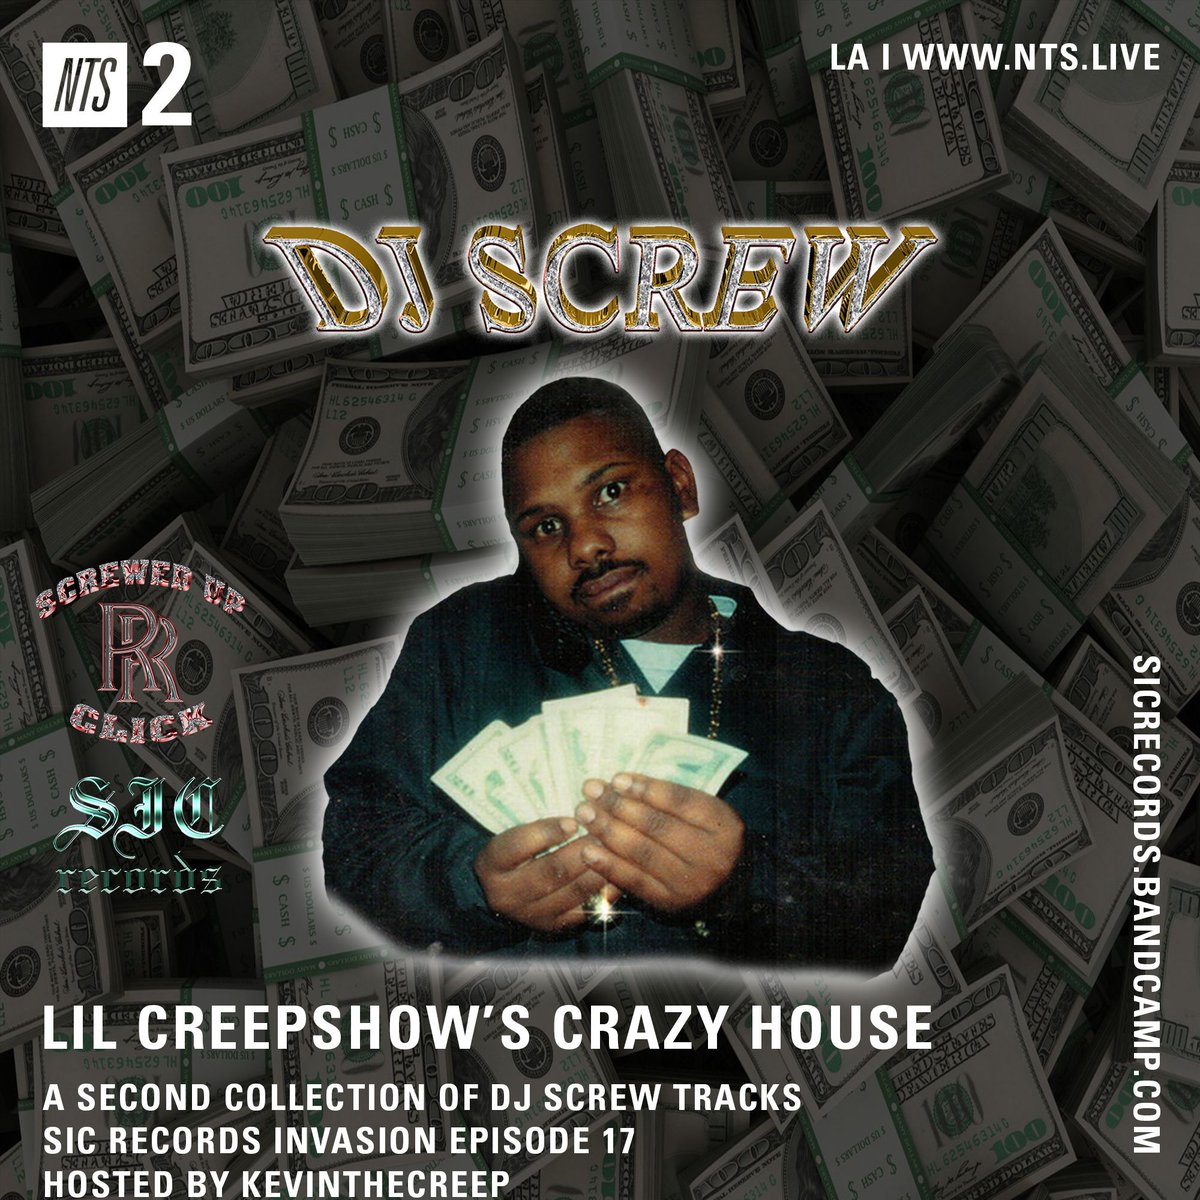 It’s @CREEPSHOW111 live for the next 60 min w/ the sequel to his DJ Screw m...